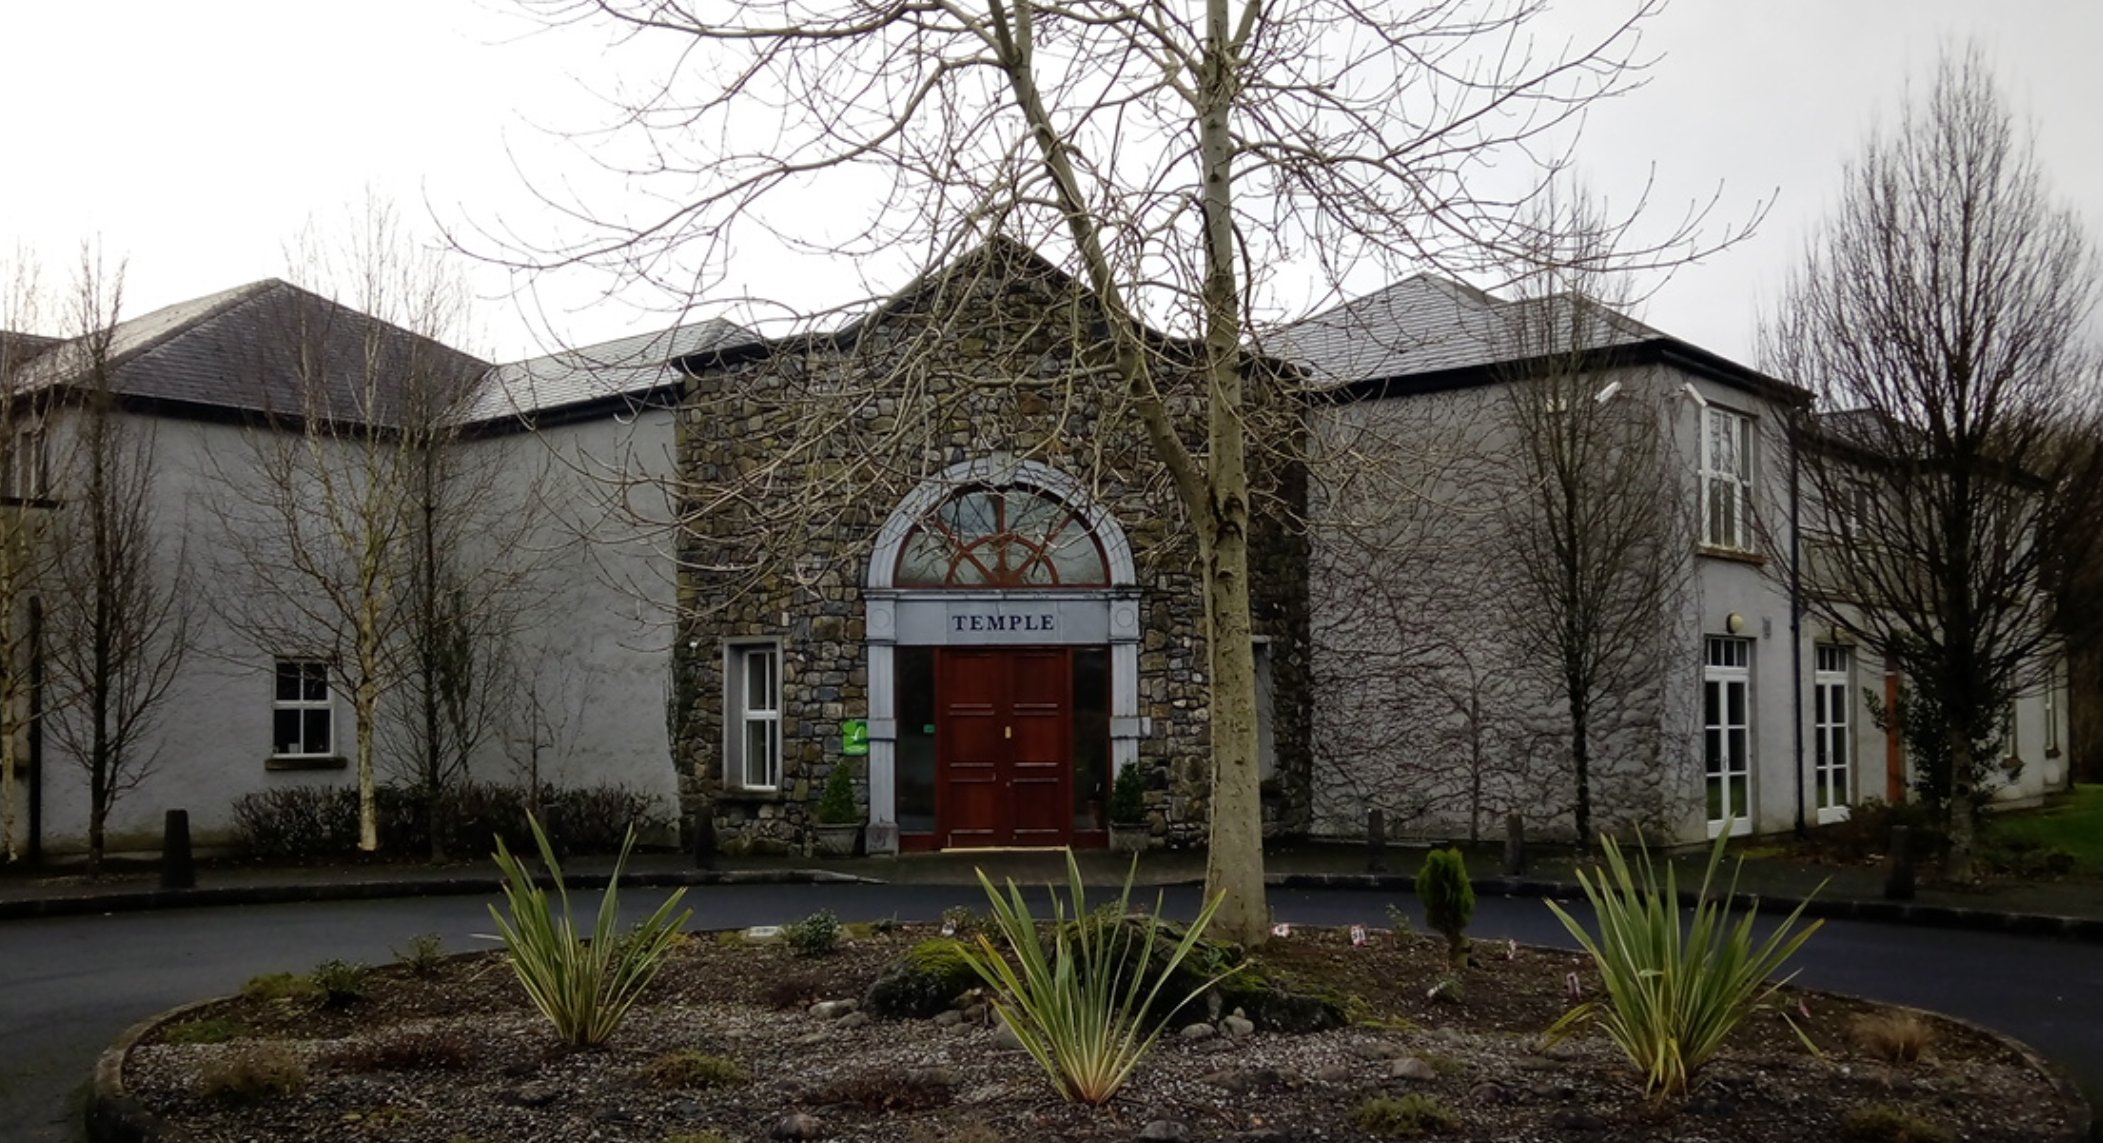 Temple Accommodation, Horseleap, Moate,. Co. Westmeath